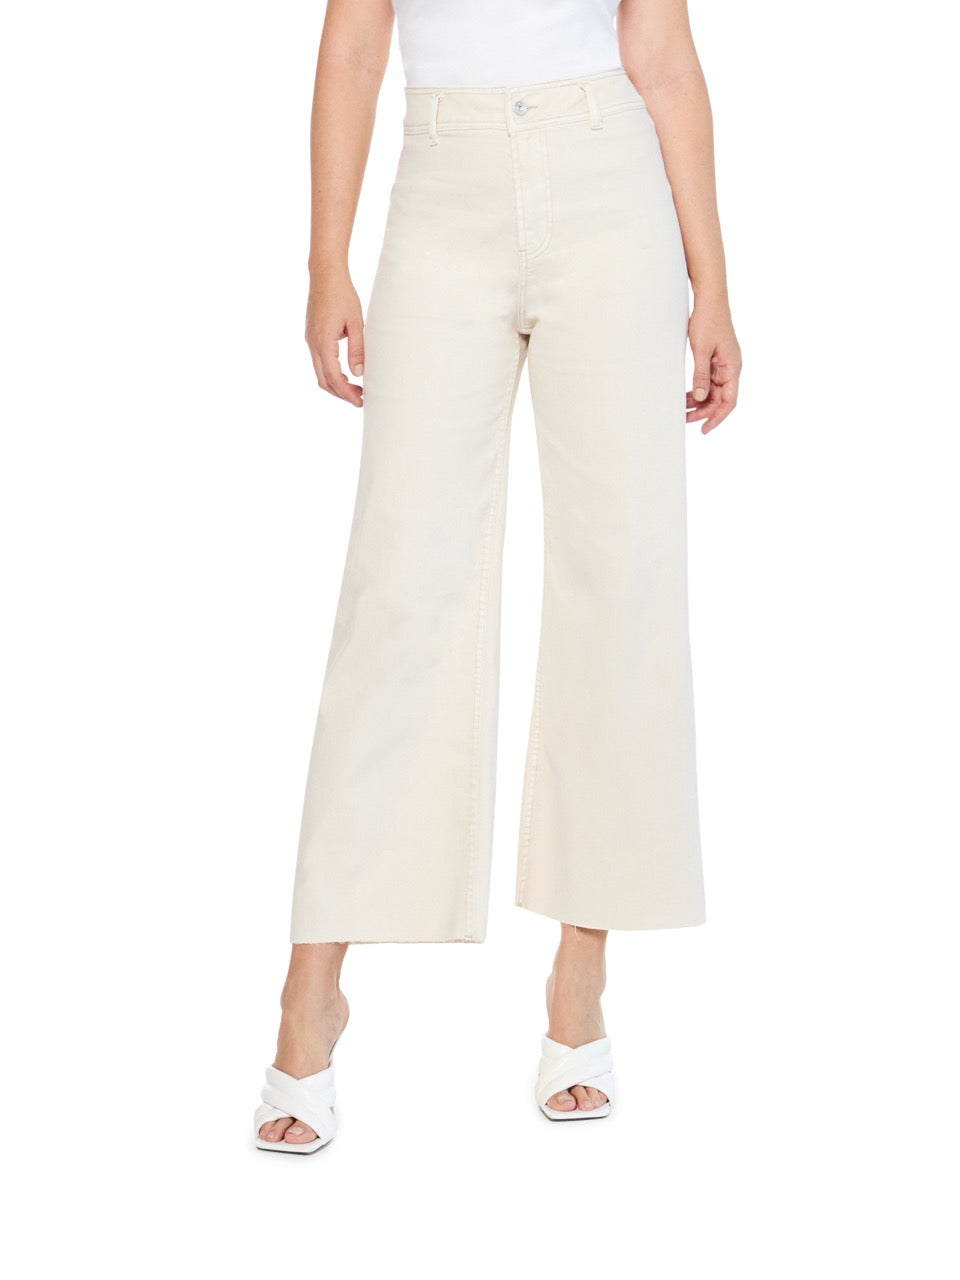 articles of society carine high rise raw wide leg jeans in stone-front view